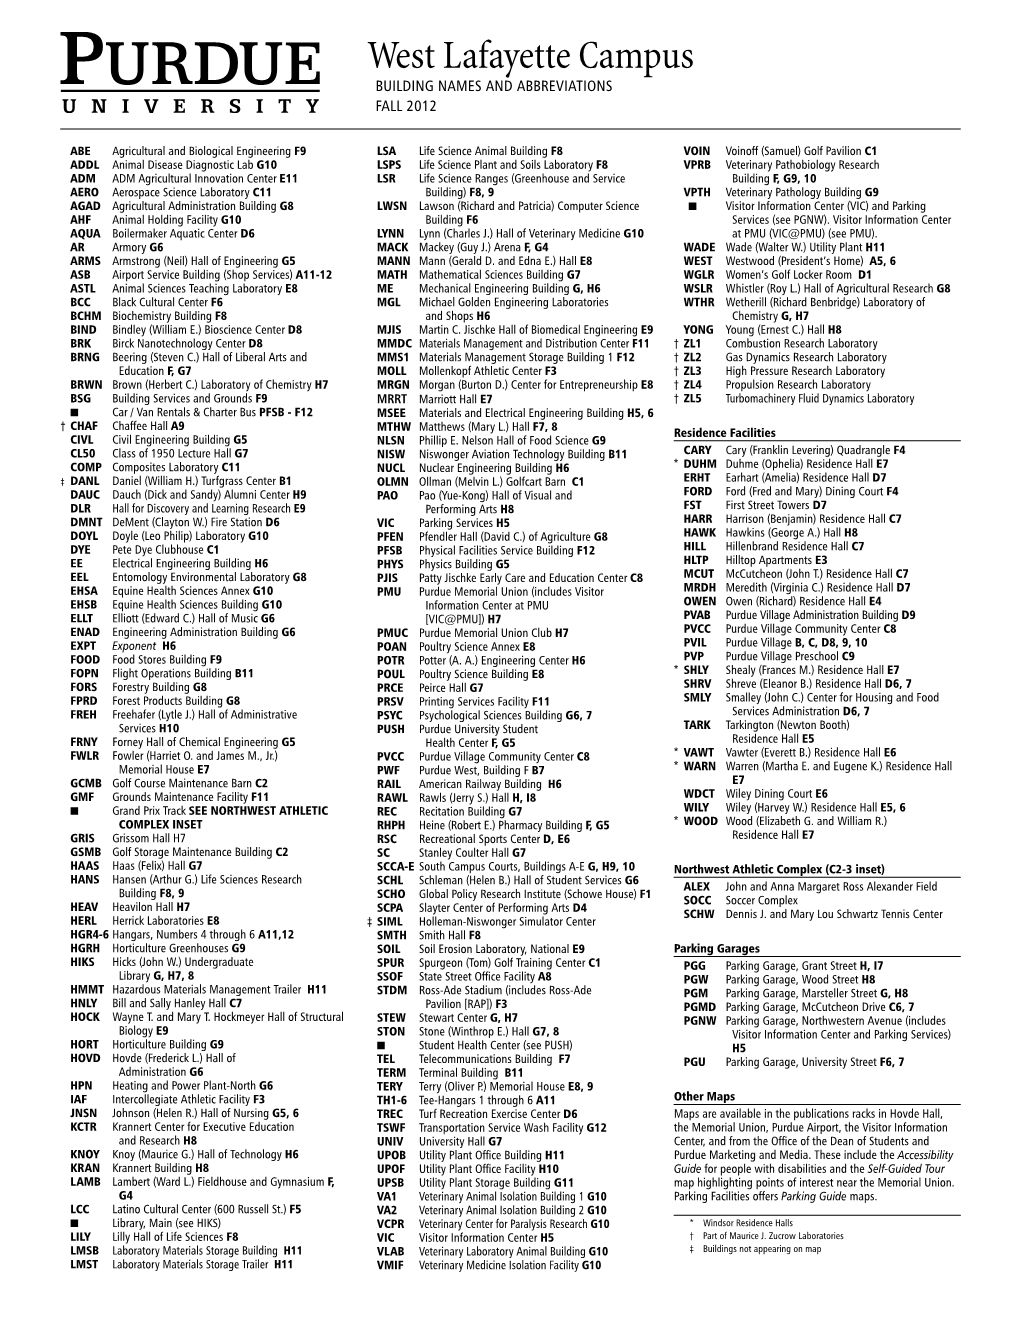 West Lafayette Campus Building Names and Abbreviations FALL 2012